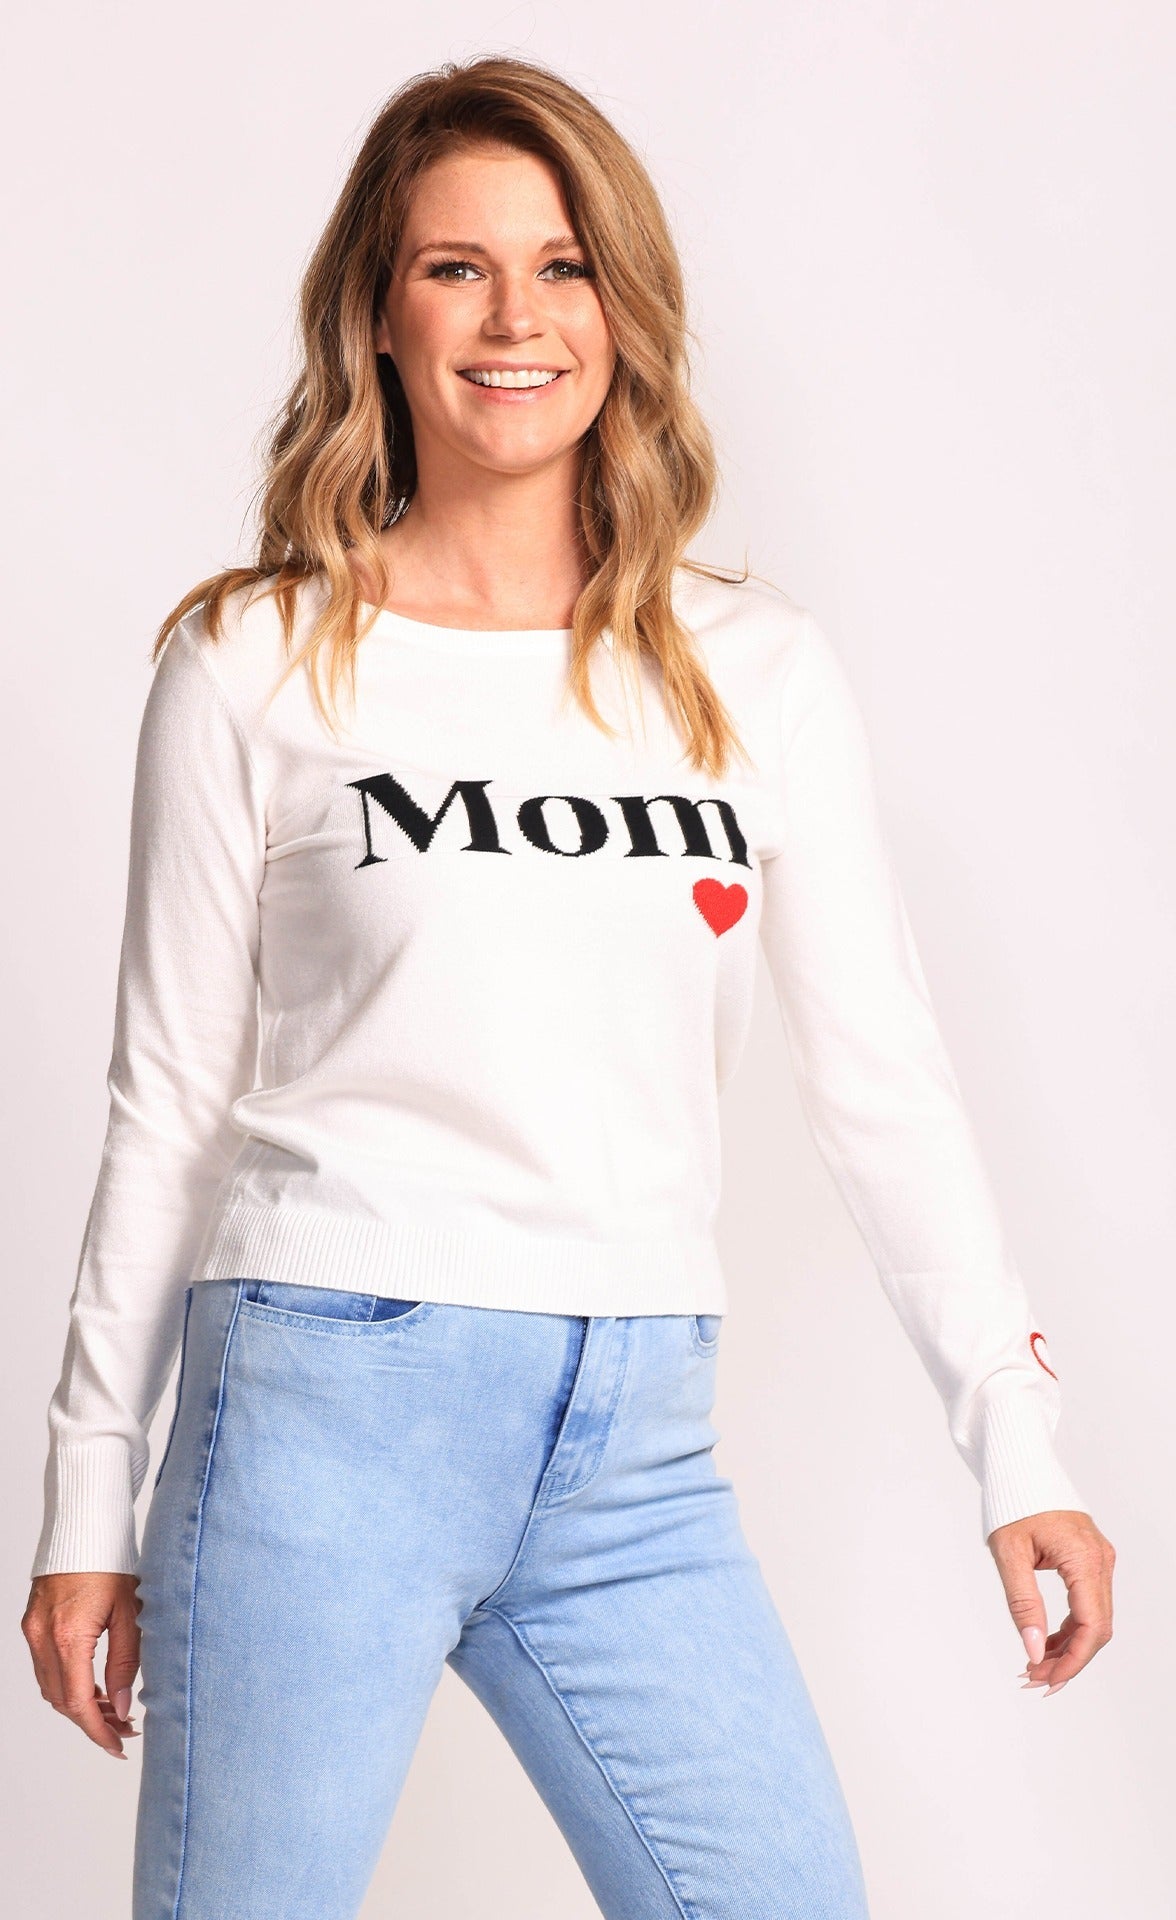 Mighty Mom Sweater